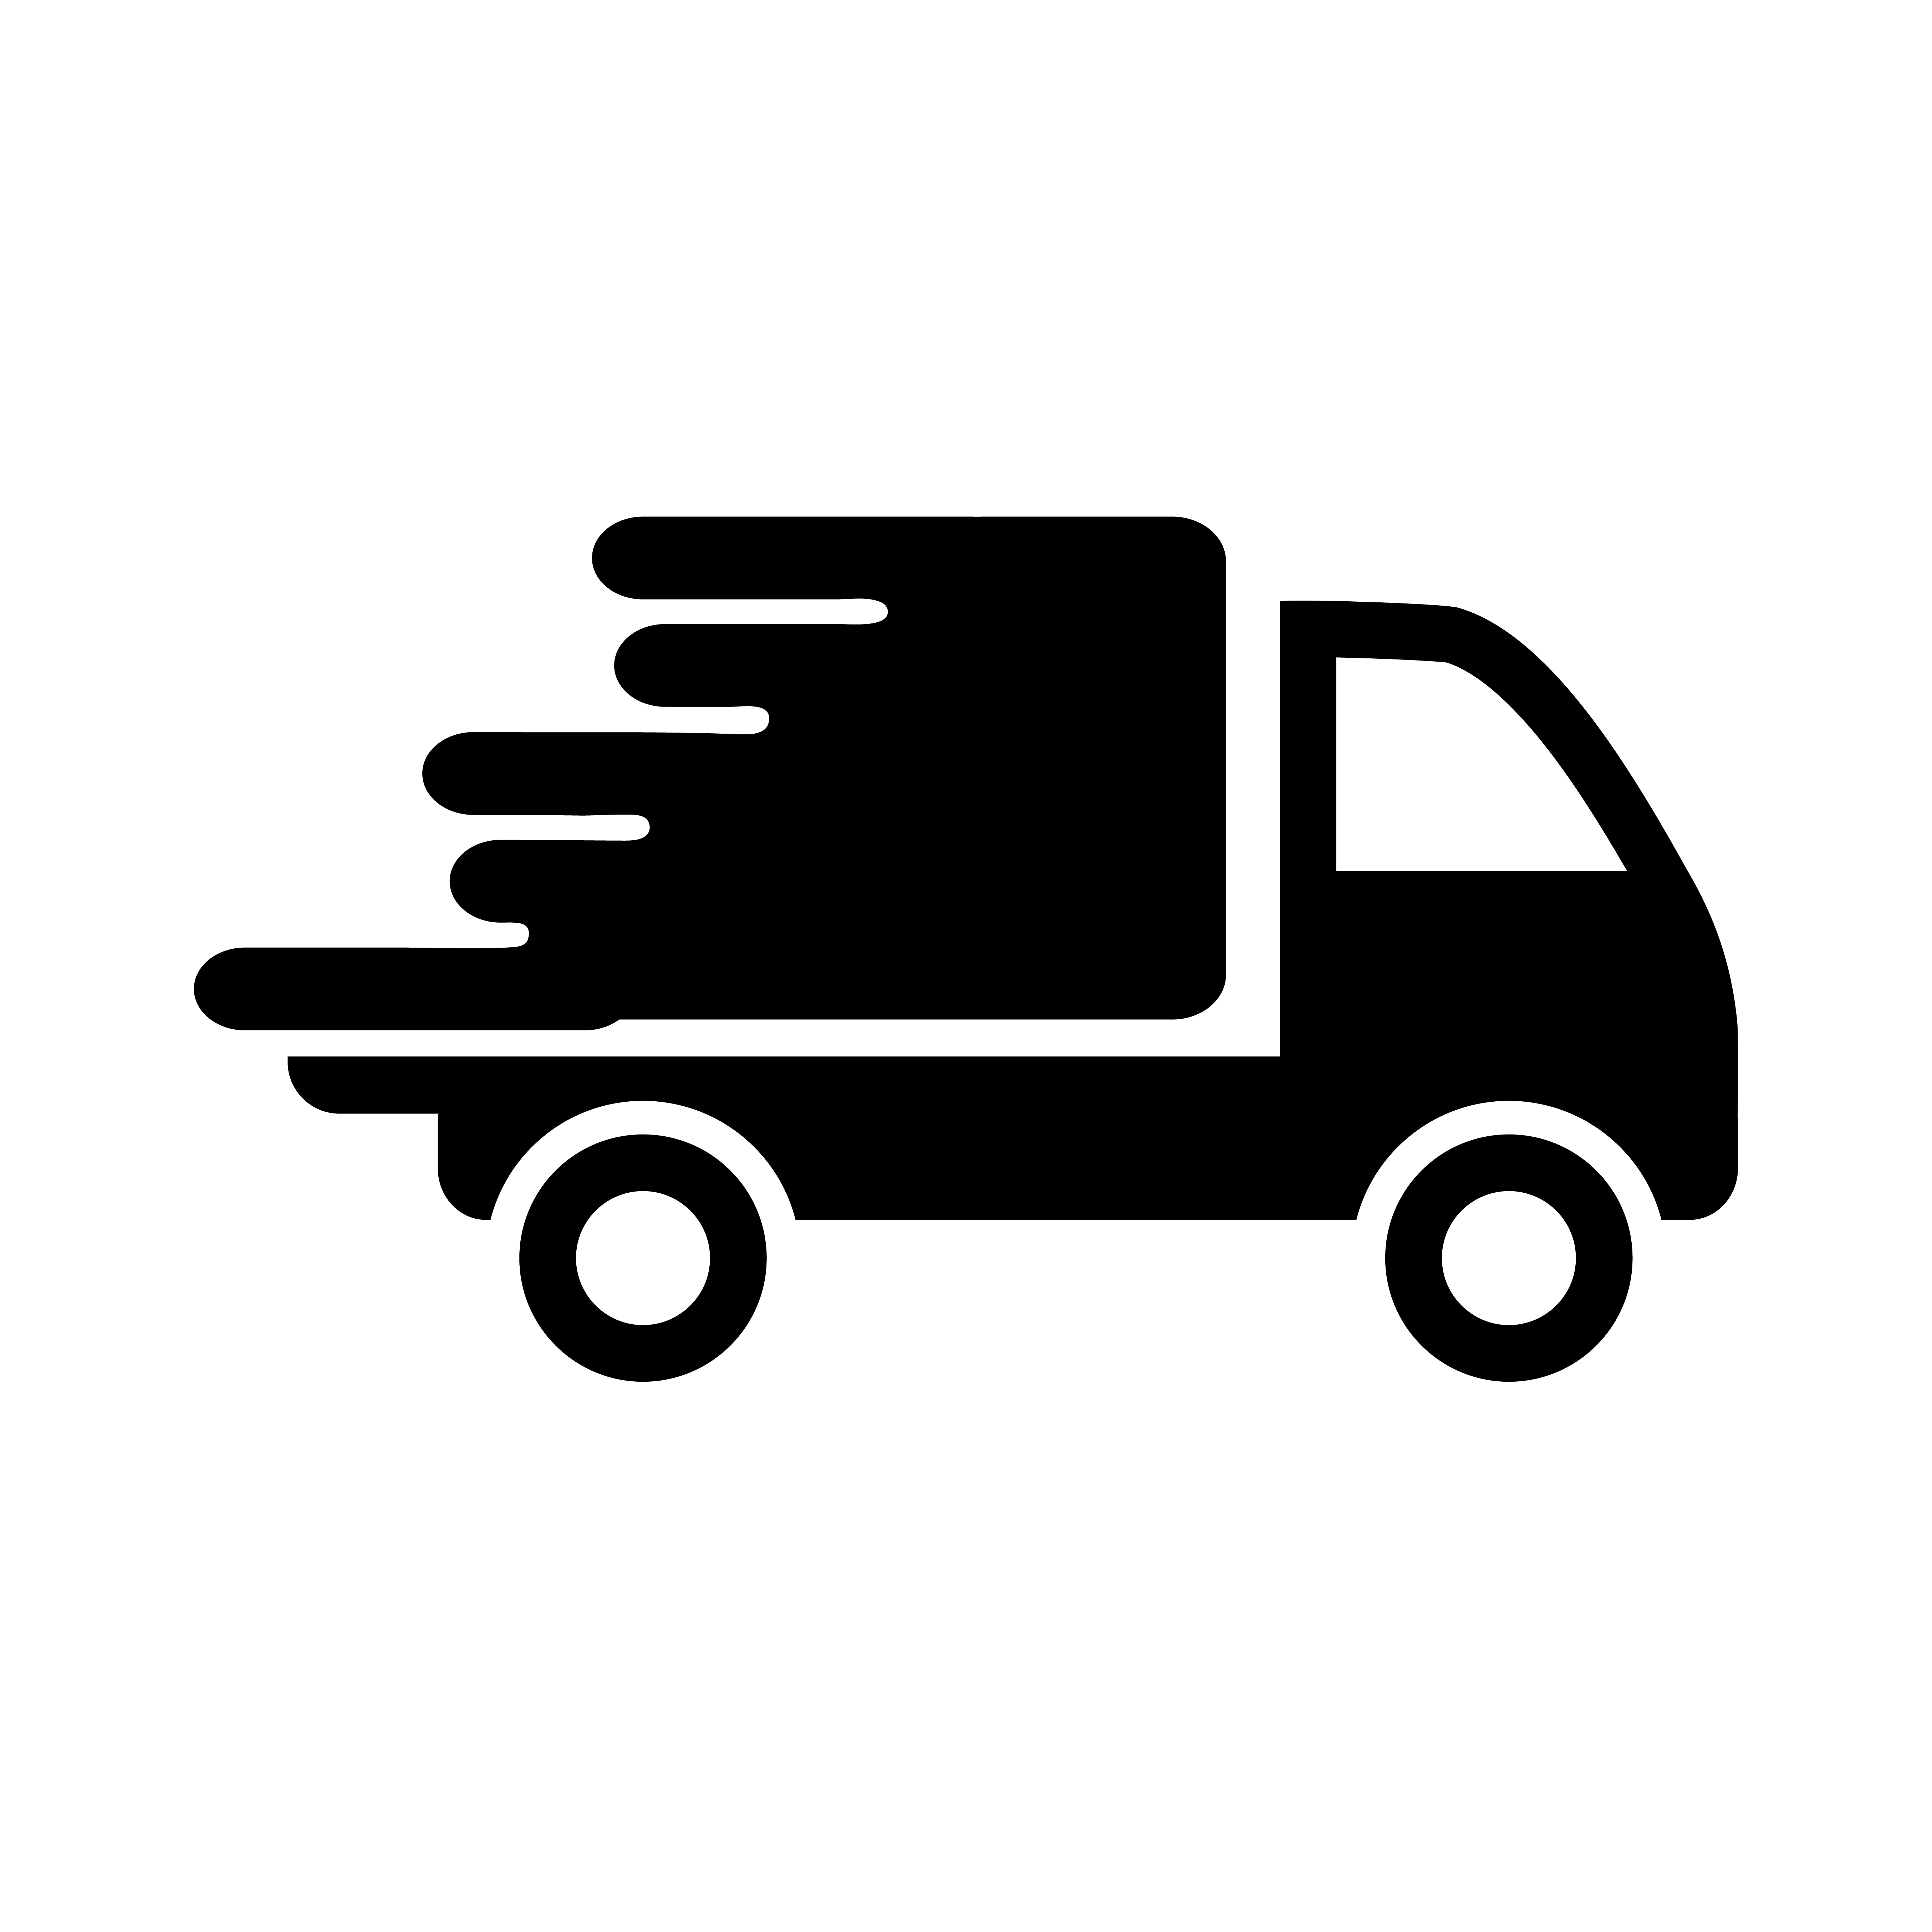 Delivery truck symbol. Vector concept of fast shipping service.Silhouette icon of transport van or package courier. Illustration of speed moving lorry sign isolated on white background.